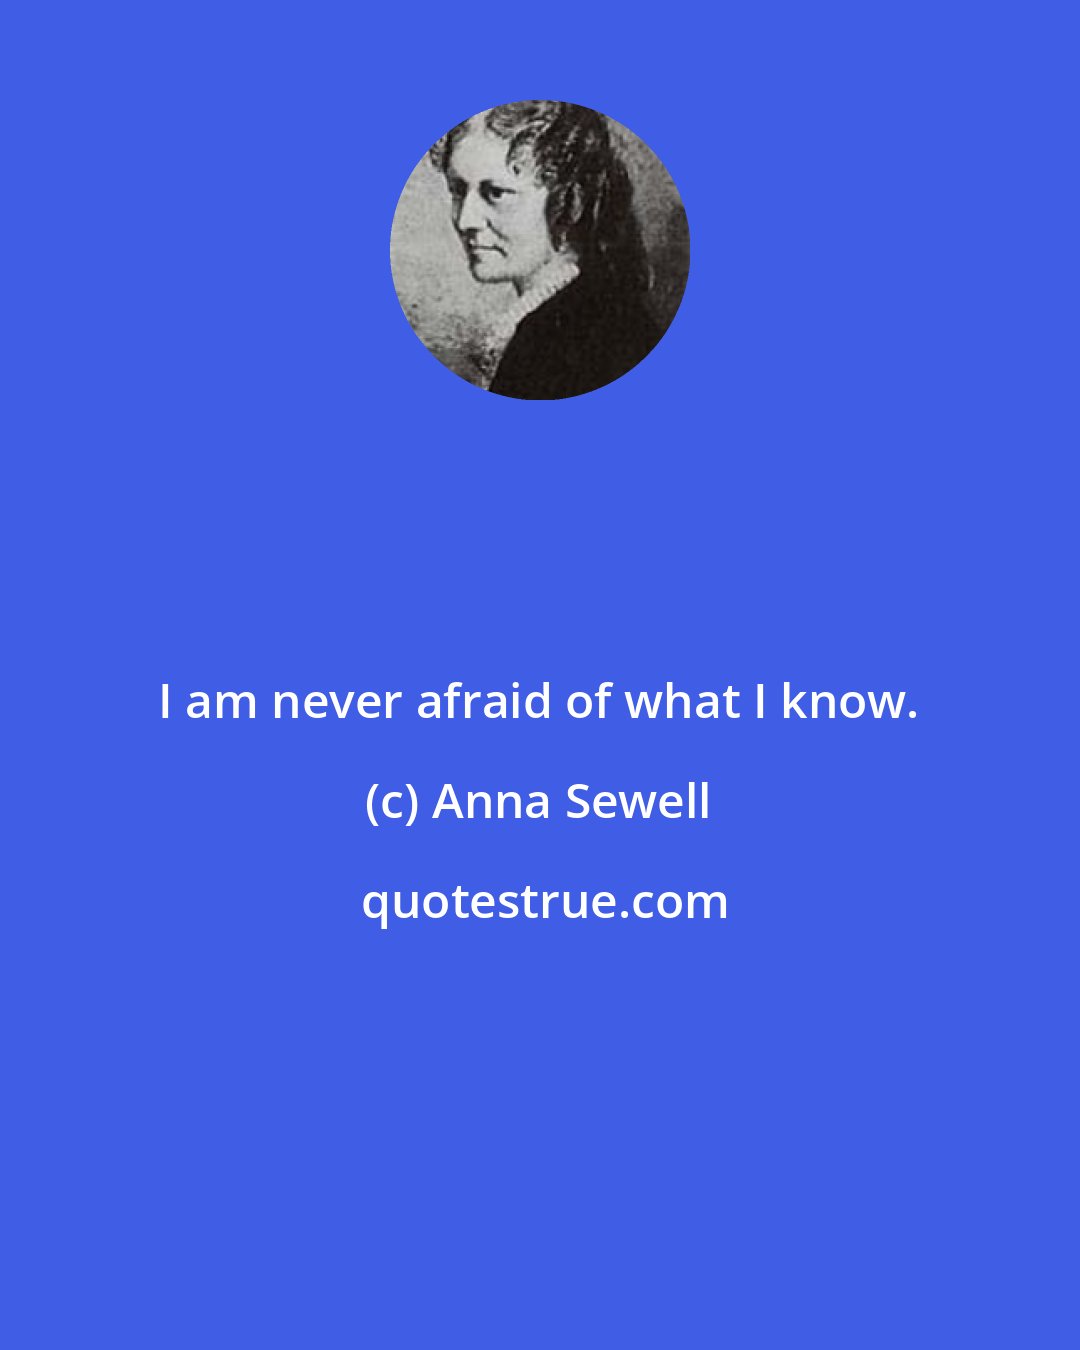 Anna Sewell: I am never afraid of what I know.